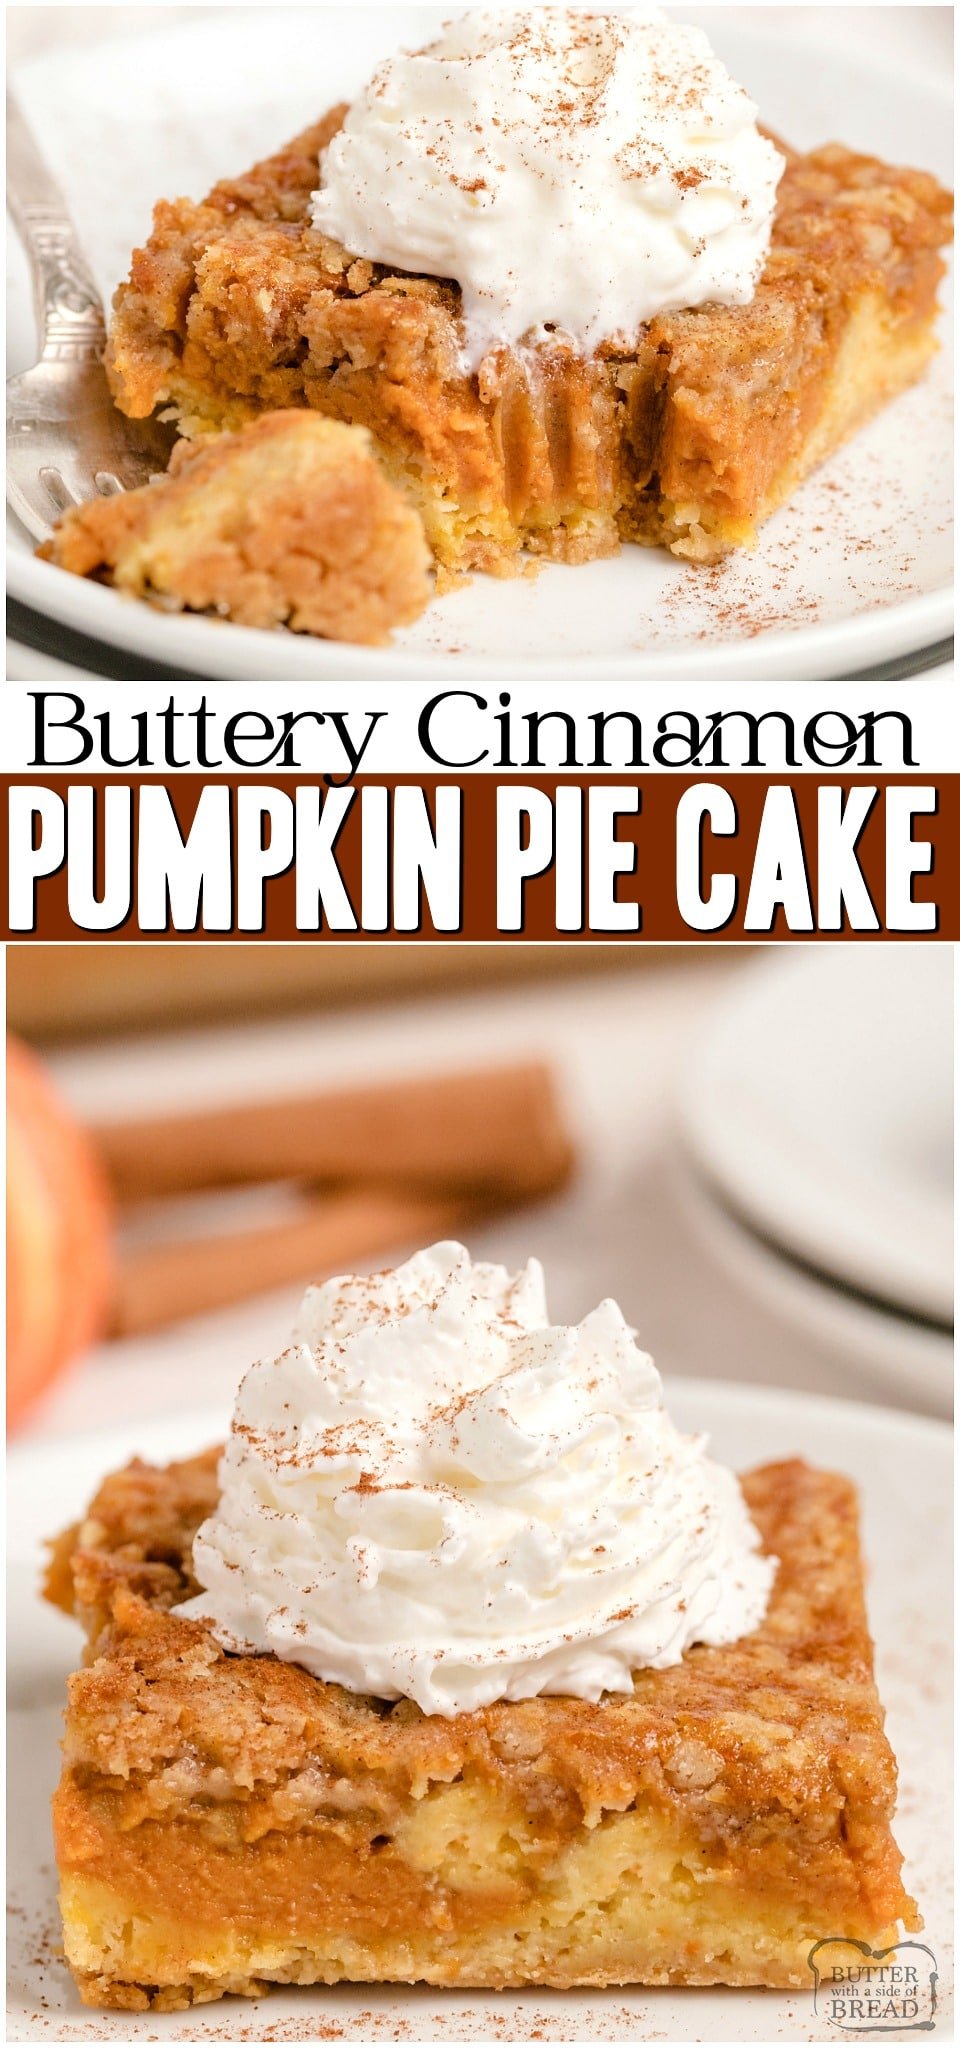 Pumpkin Pie Cake is festive Fall dessert made with a cake mix & pumpkin. Easy layered pumpkin cake that comes together fast and is a family favorite! #pumpkin #pumpkinpie #cake #Fall #dessert #baking #easyrecipe from BUTTER WITH A SIDE OF BREAD